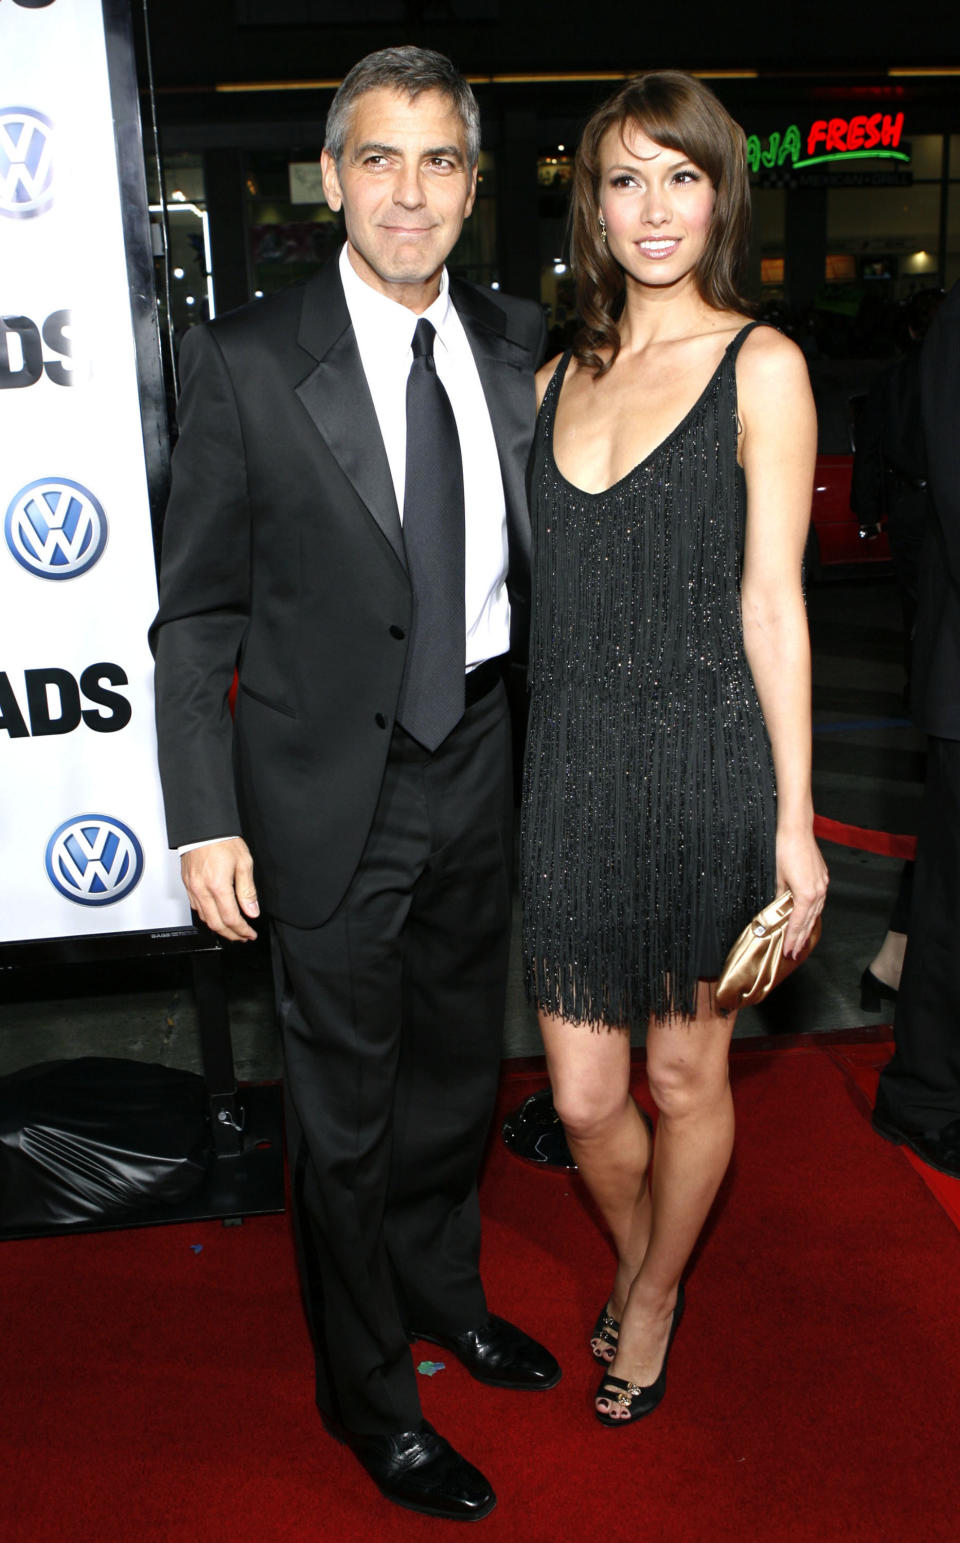 FILE - In this March 11, 2008 file photo, George Clooney, left, and Sarah Larson arrive at the premiere of "Leatherheads" in Los Angeles. Clooney, 52, Hollywood’s most determined bachelor famous for a litany of fleeting loves, including Larson, has taken himself off the romantic market and proposed to 36-year-old attorney, Amal Alamuddin. A spokesman for the Oscar-winning actor and producer did not respond to requests for comment Monday, April 28, 2014. (AP Photo/Matt Sayles, file)